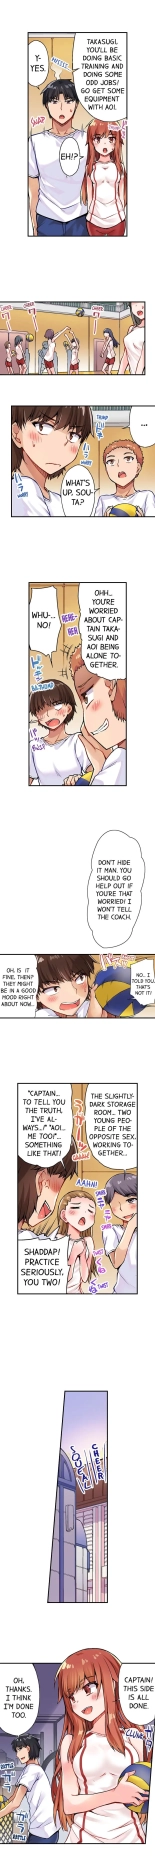 Traditional Job of Washing Girls' Body Ch. 1-181 : page 260